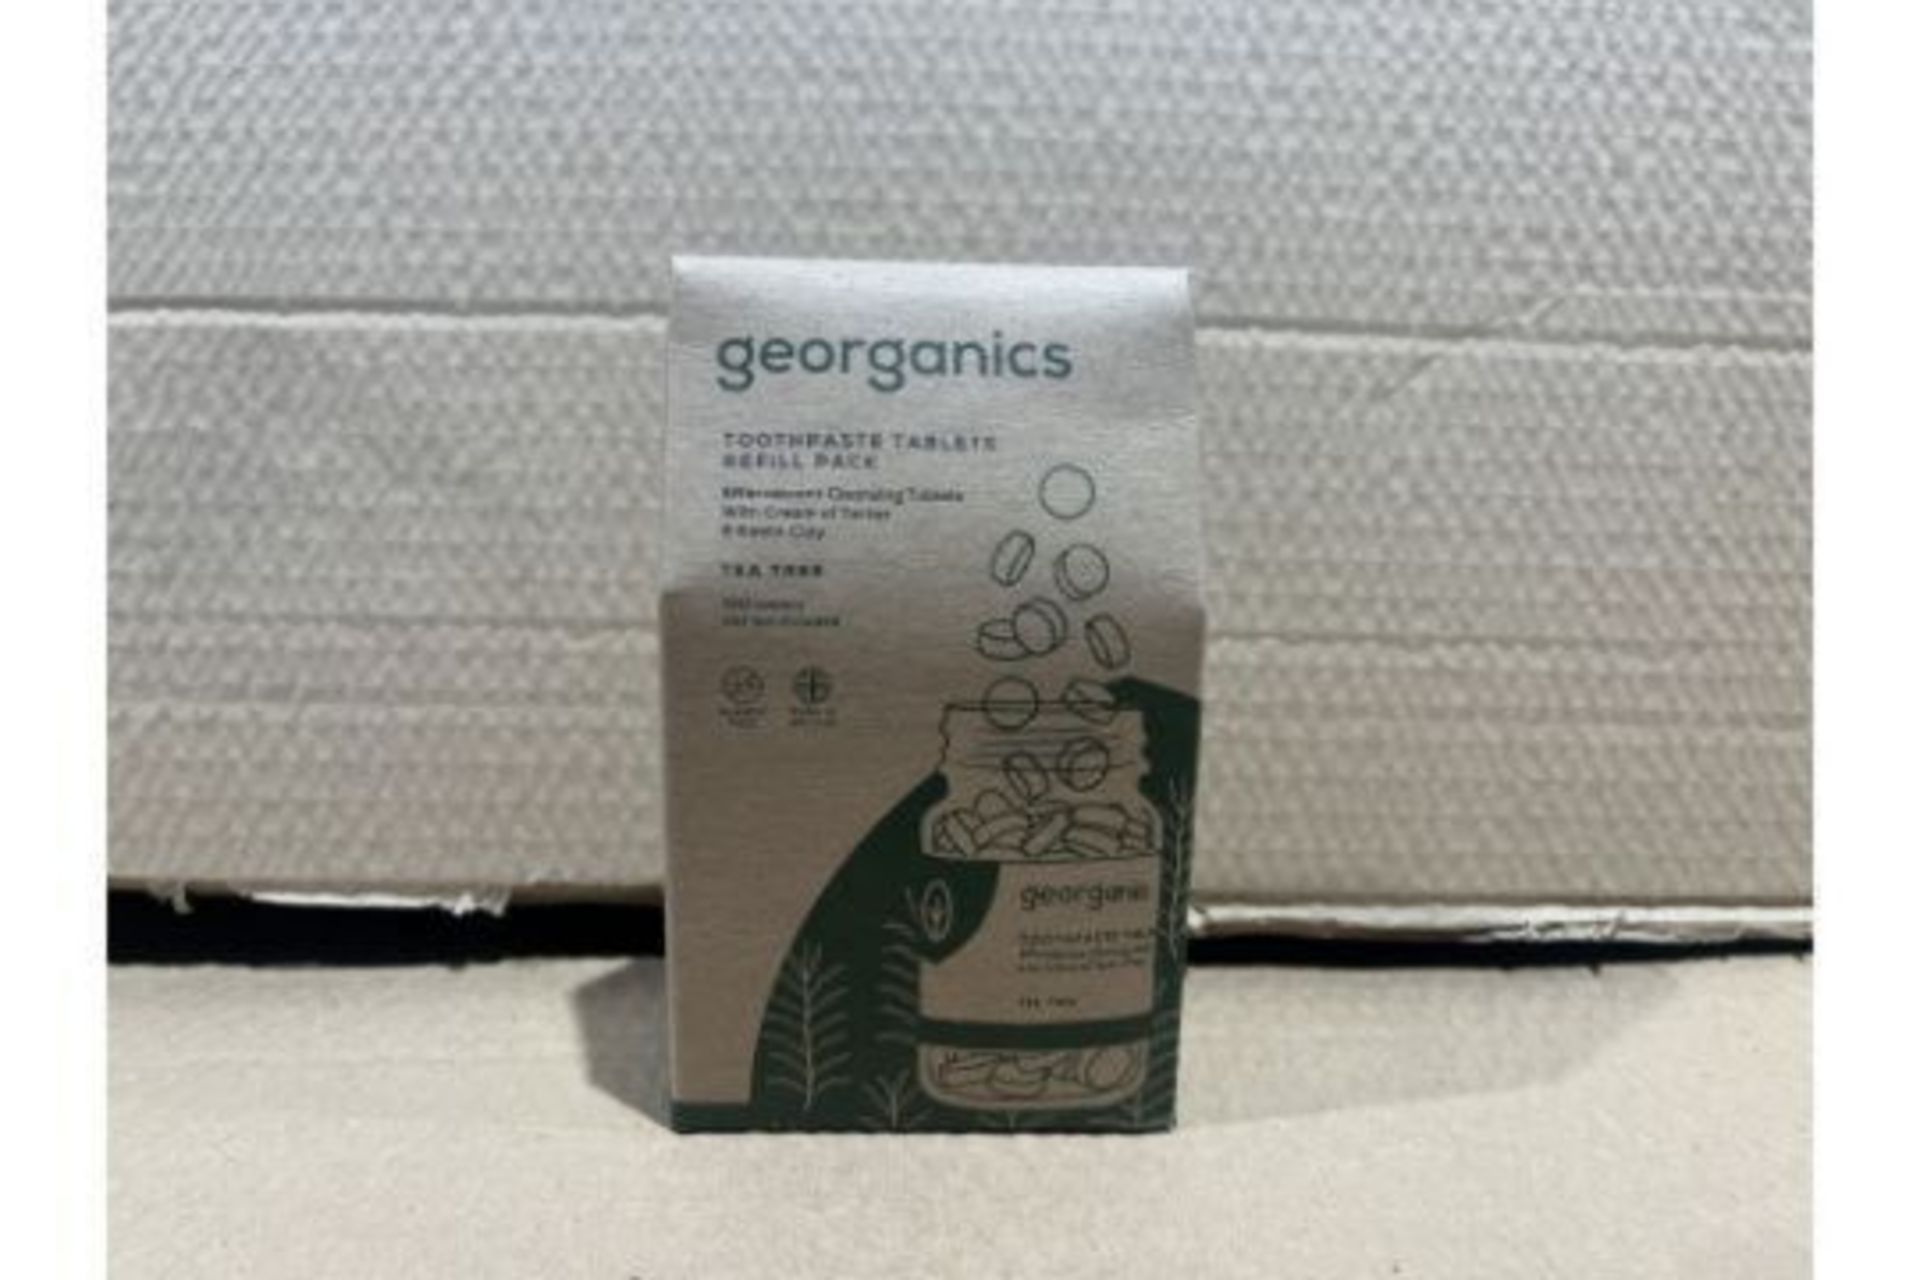 20 X BRAND NEW GEORGANICS PACKS OF 720 TOOTHPASTE TABLETS REFILL PACKS RRP £26 EACH S2